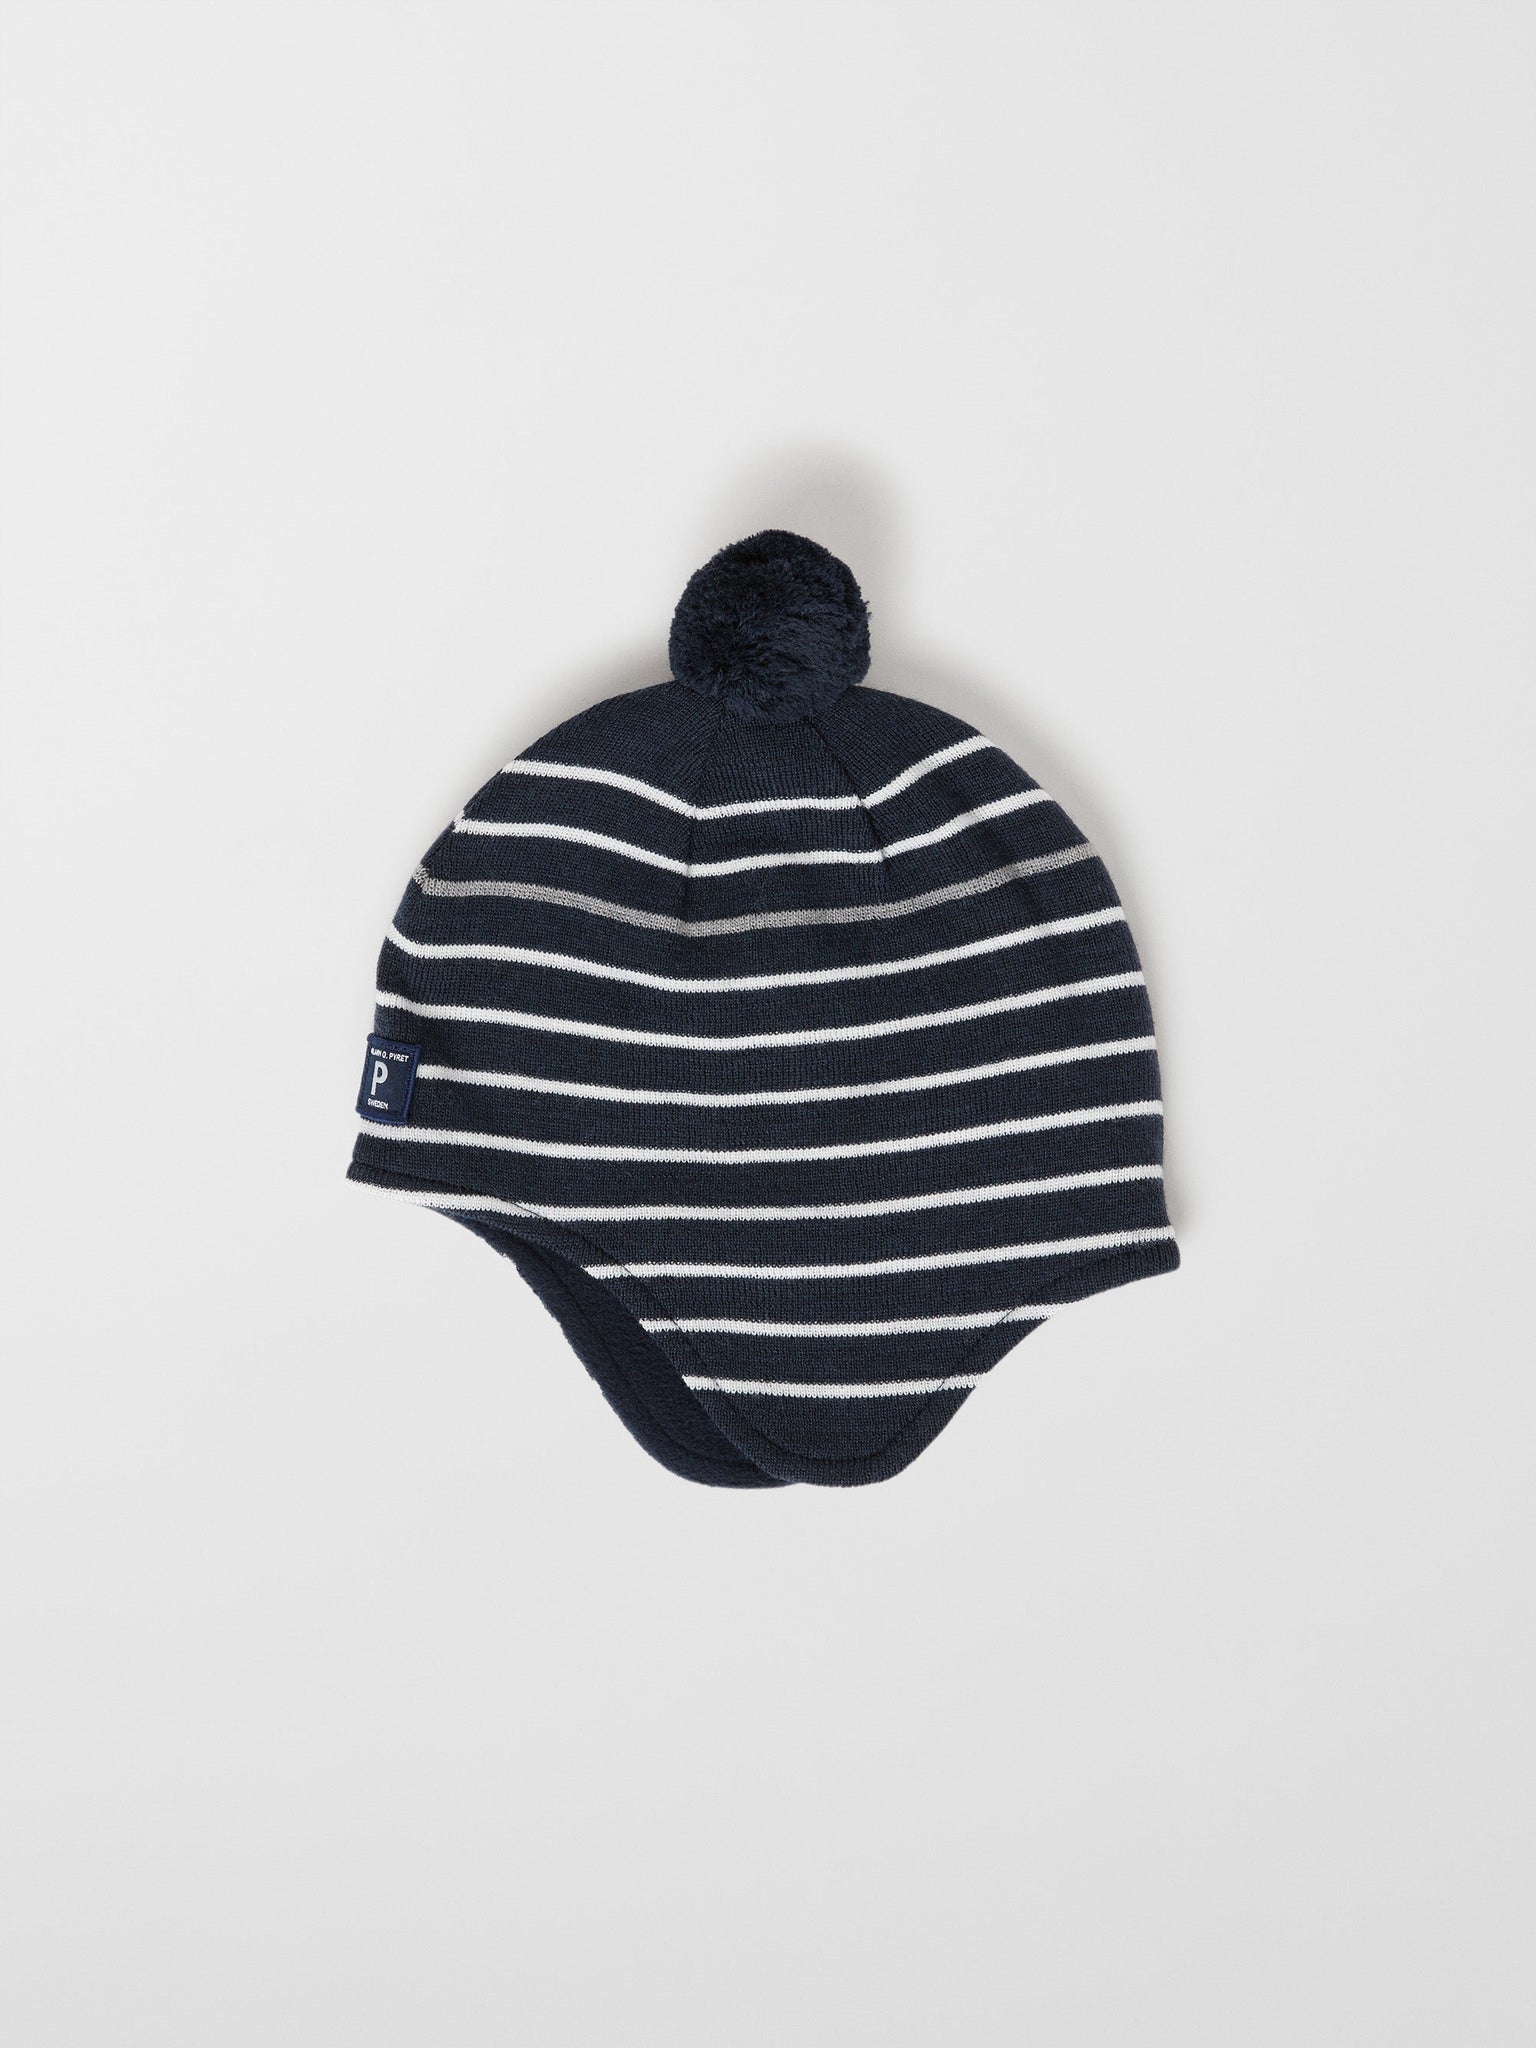 Merino Wool Navy Kids Bobble Hat from the Polarn O. Pyret outerwear collection. Ethically produced kids outerwear.